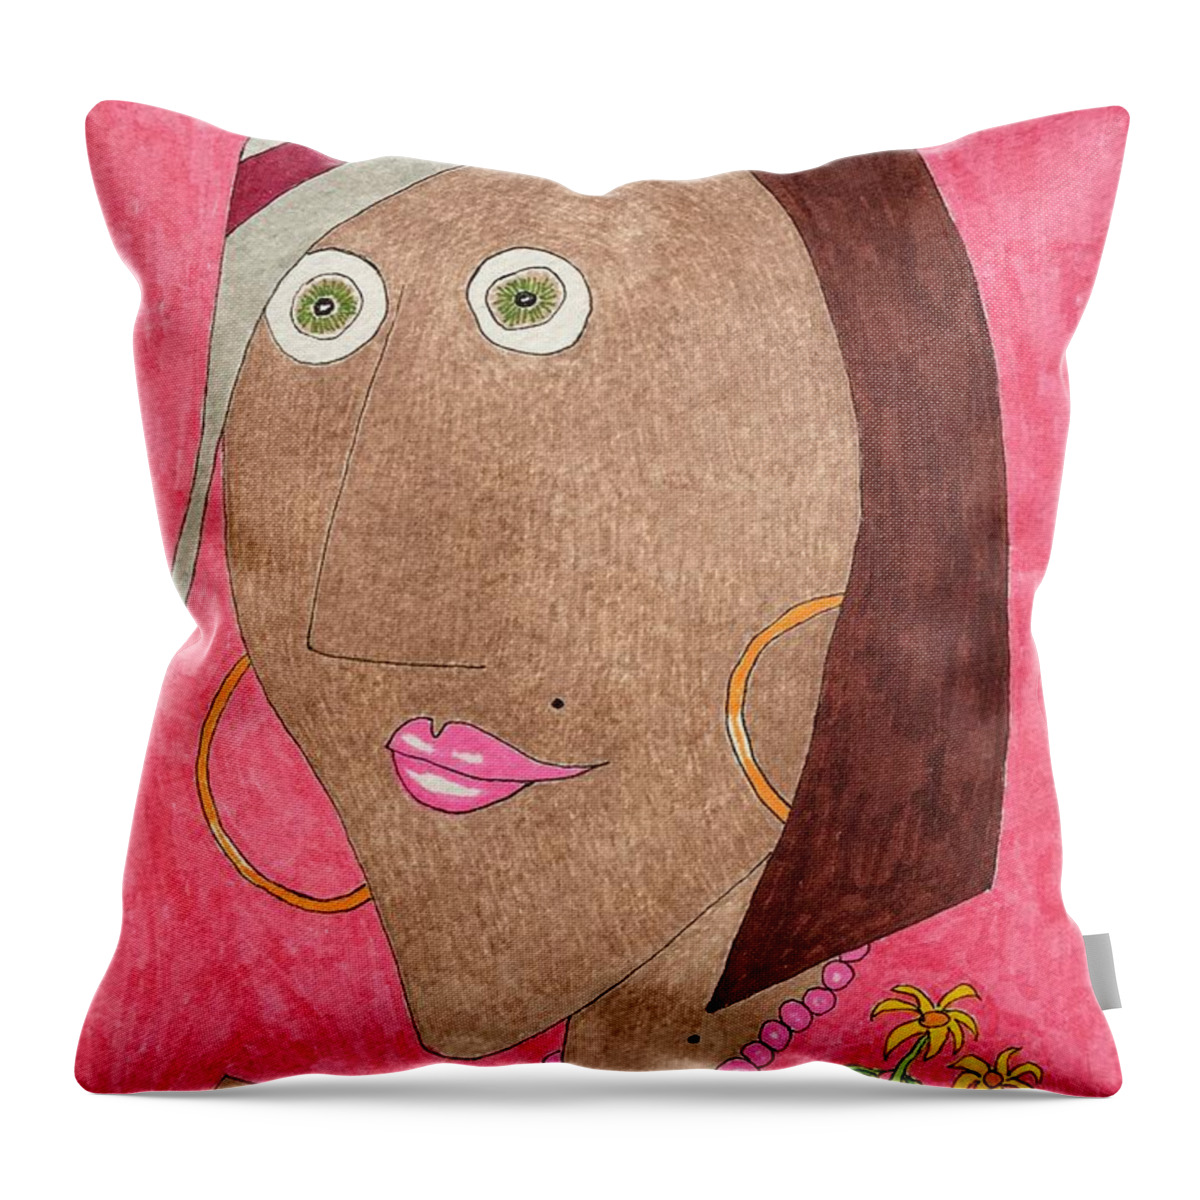  Throw Pillow featuring the painting Kiwi Eyes by Lew Hagood